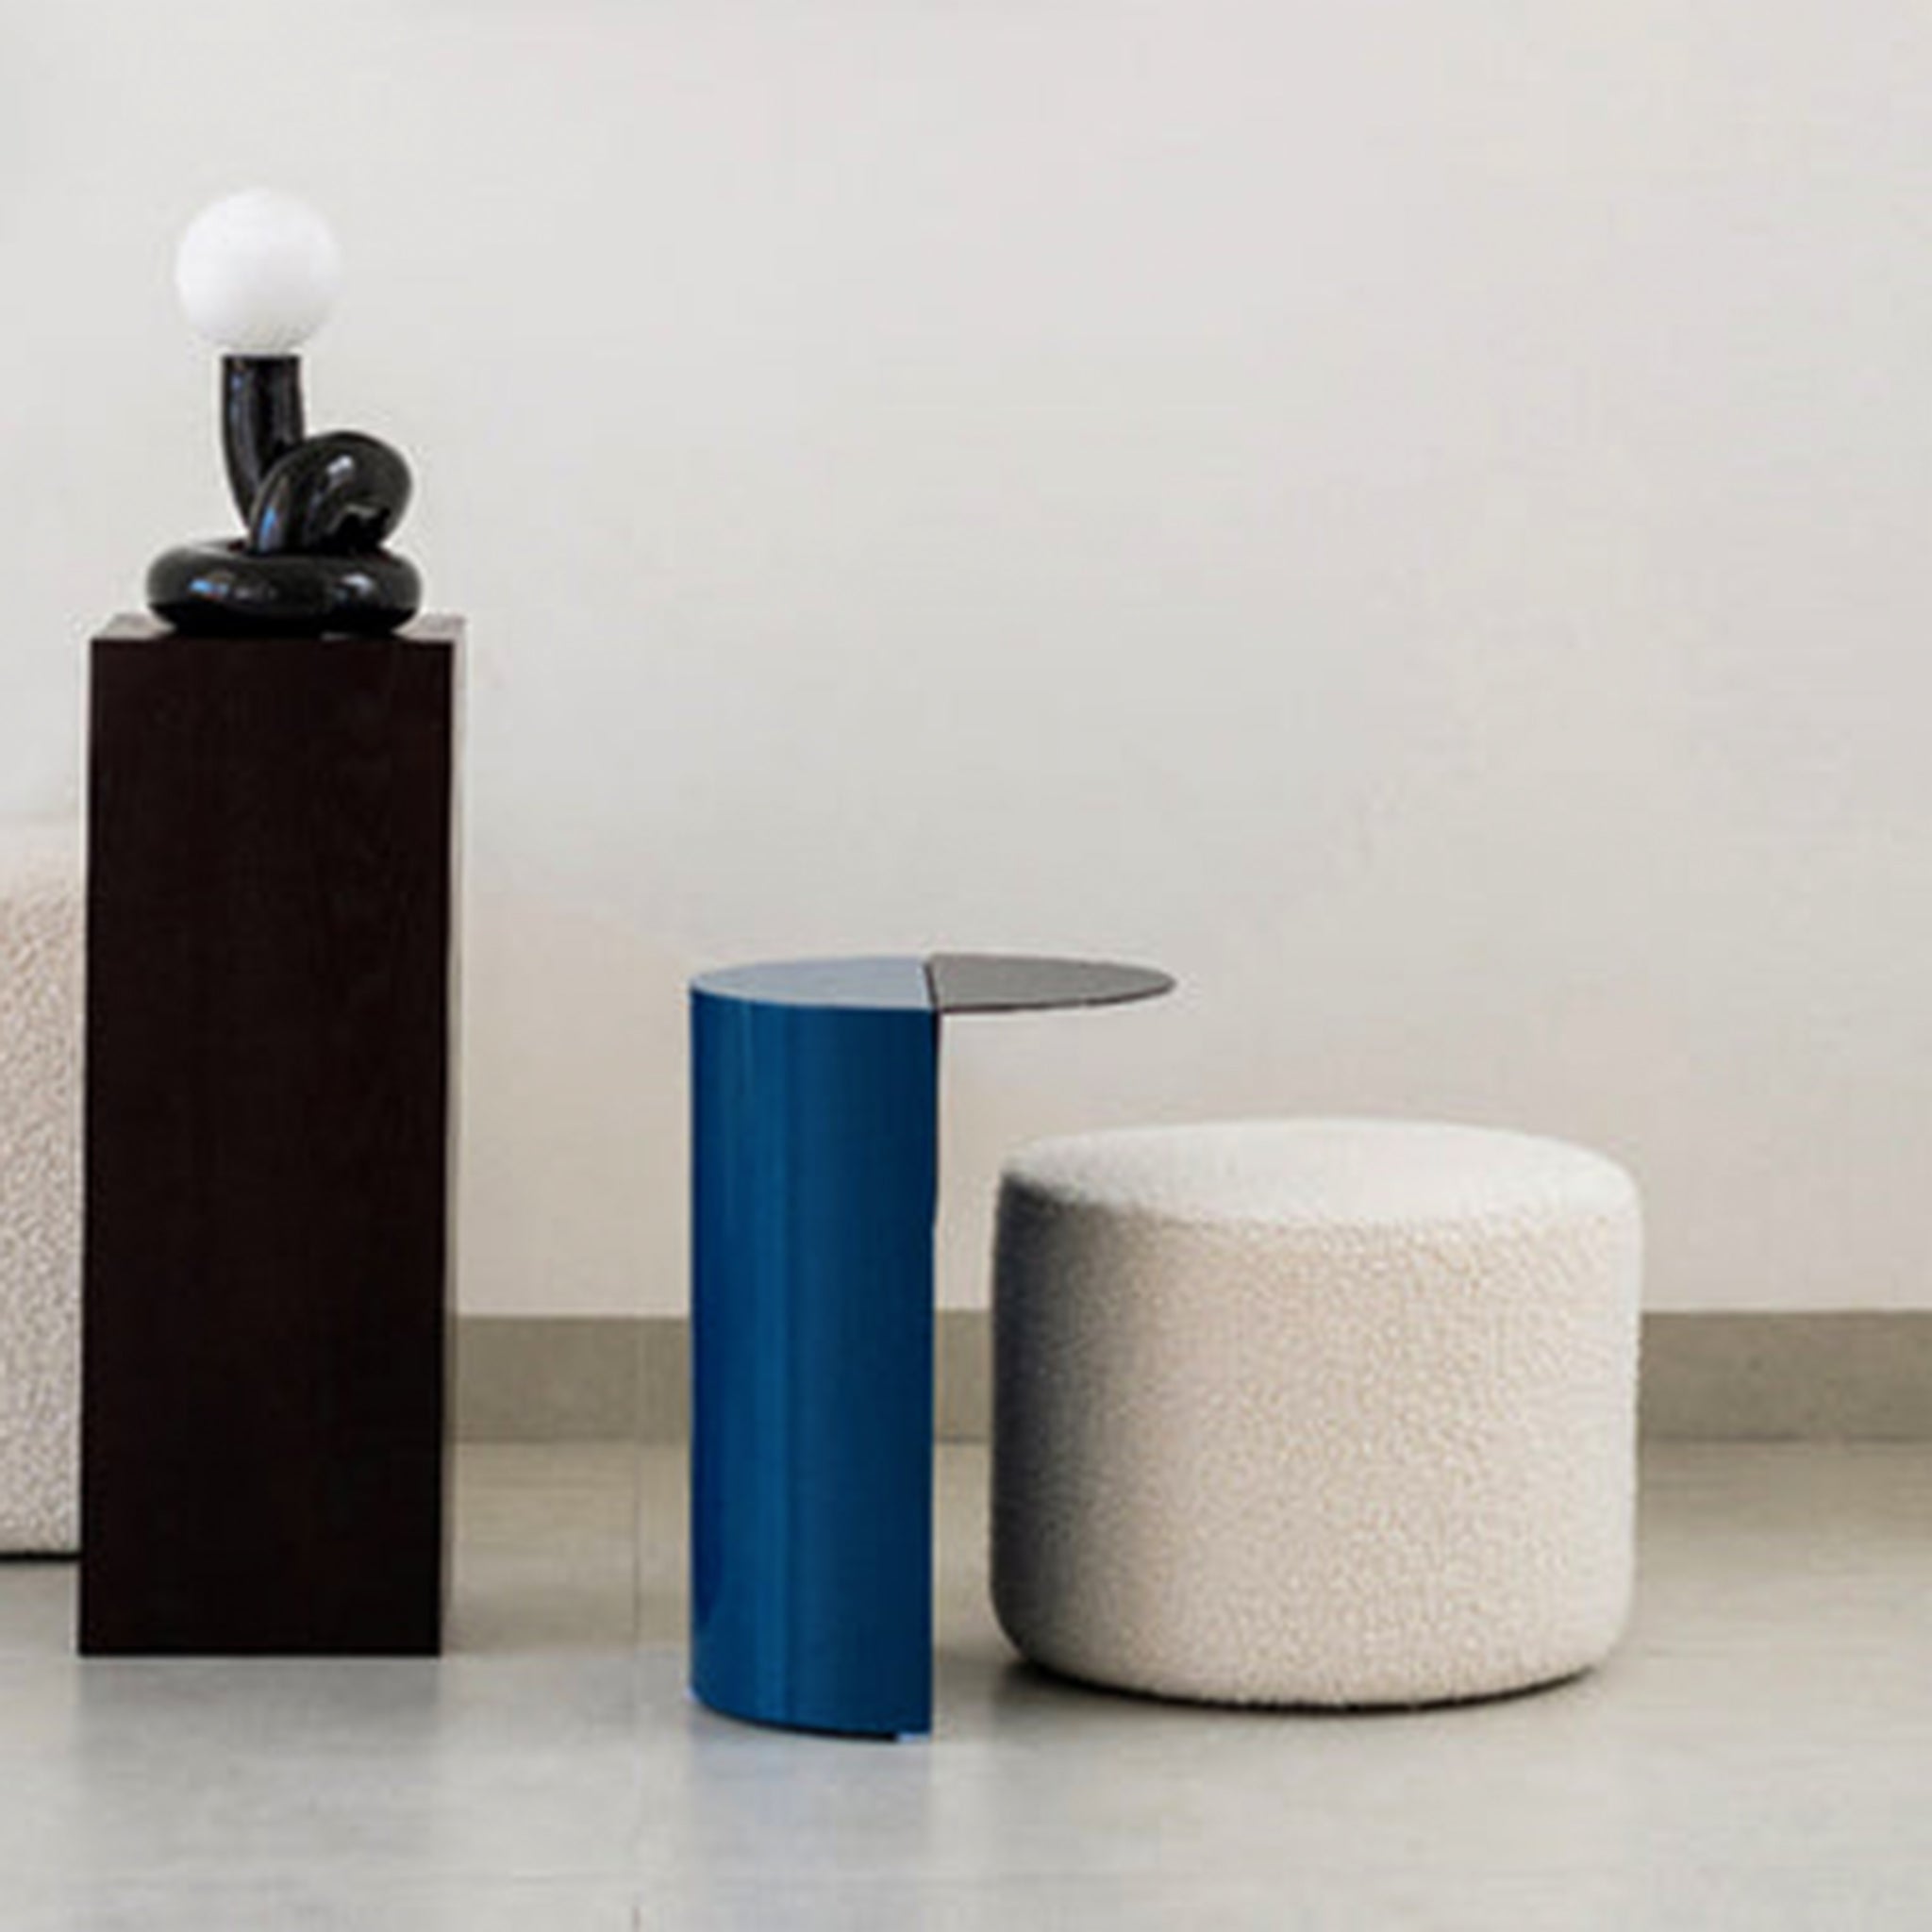 White ottoman and blue side table with a lamp on a white background